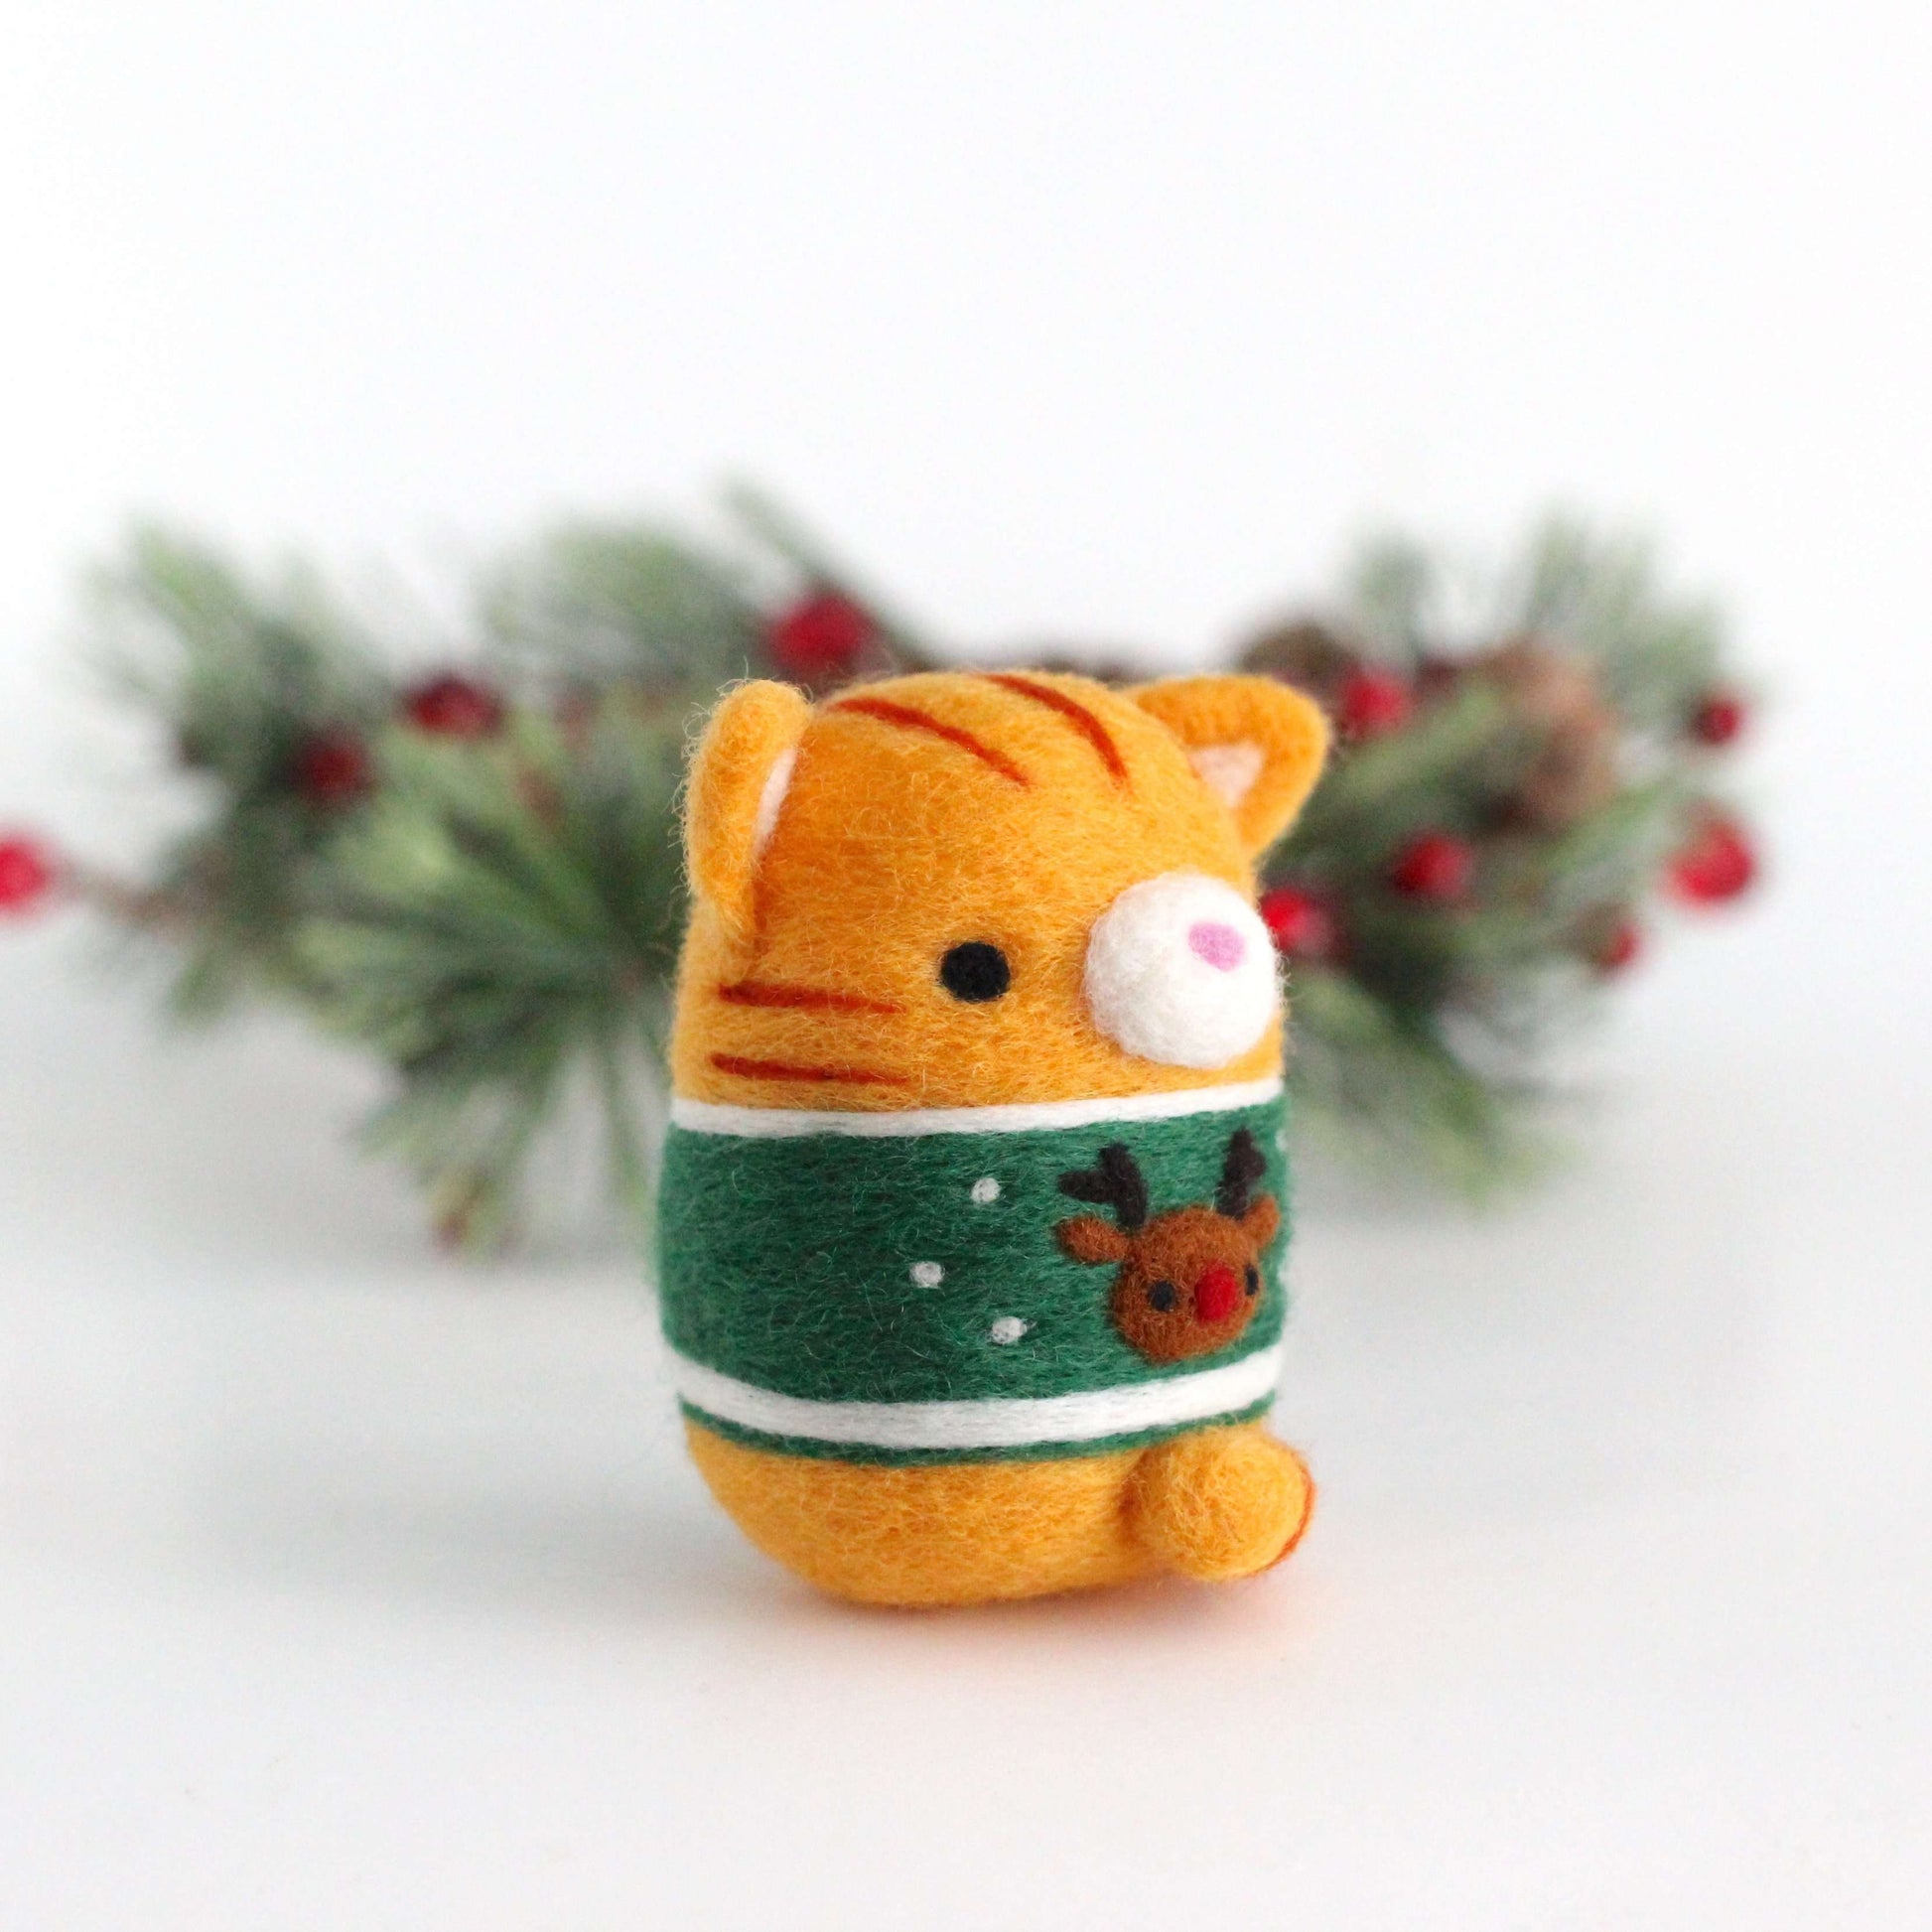 Needle Felted Ginger Tabby Cat in Reindeer Christmas Sweater by Wild Whimsy Woolies